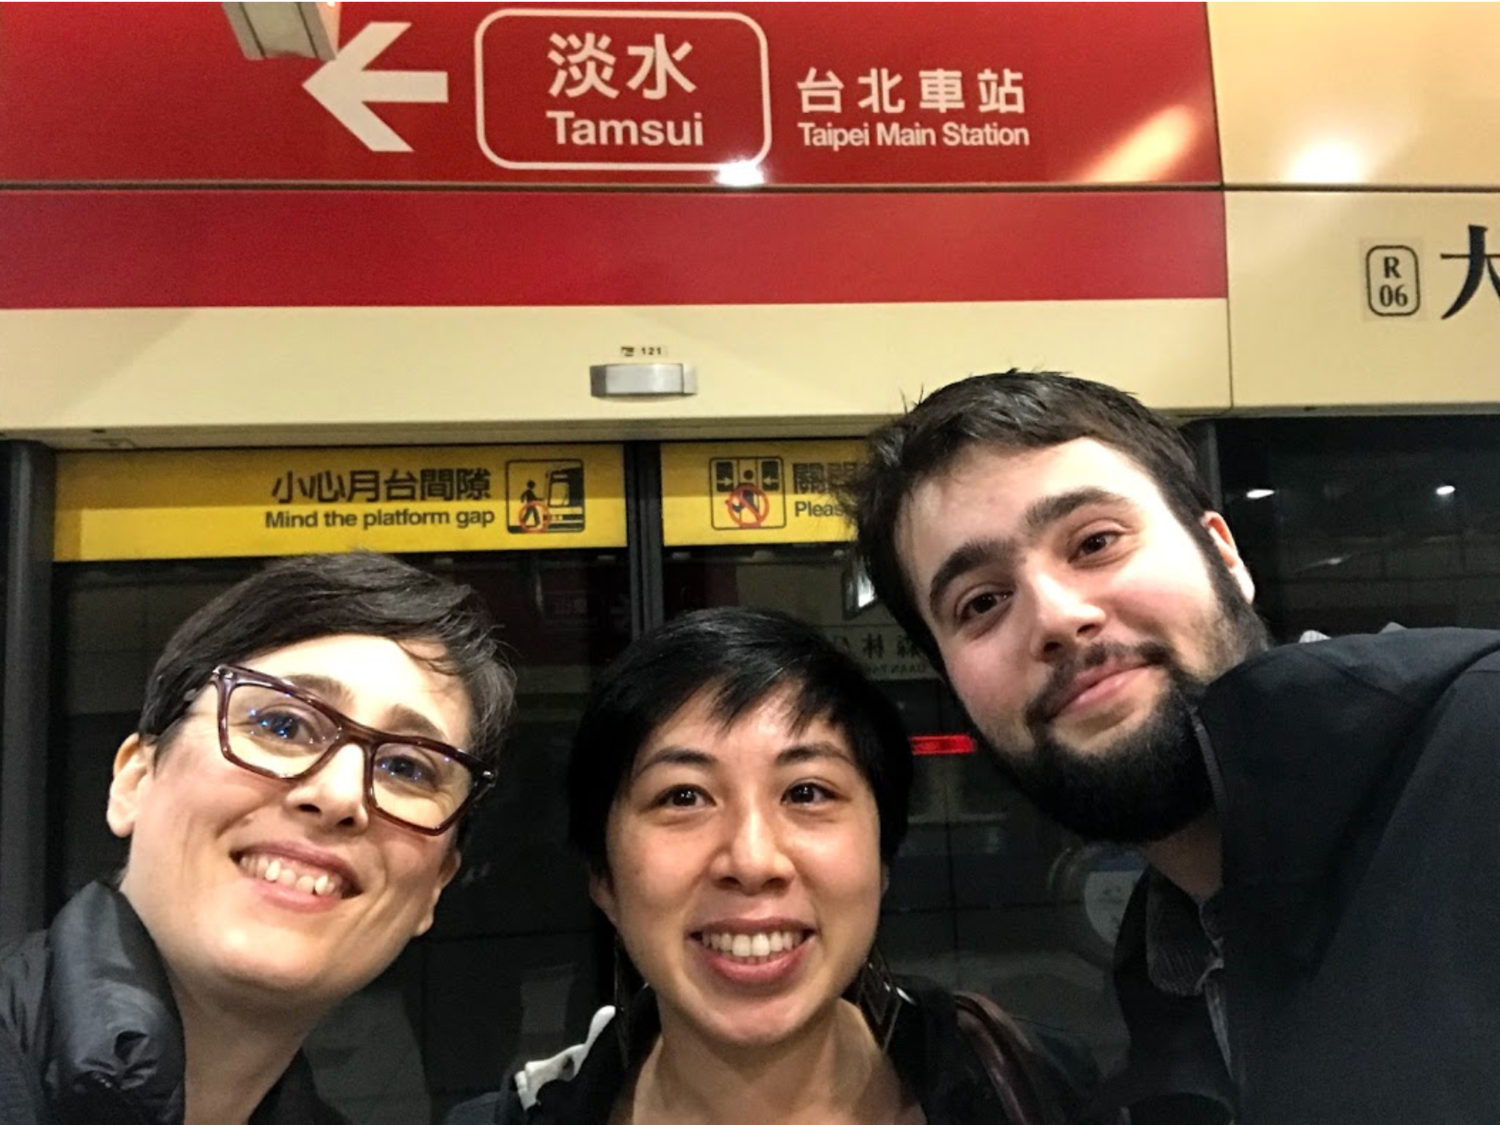 Episode 80: Commonplace goes to Taiwan, Part 1